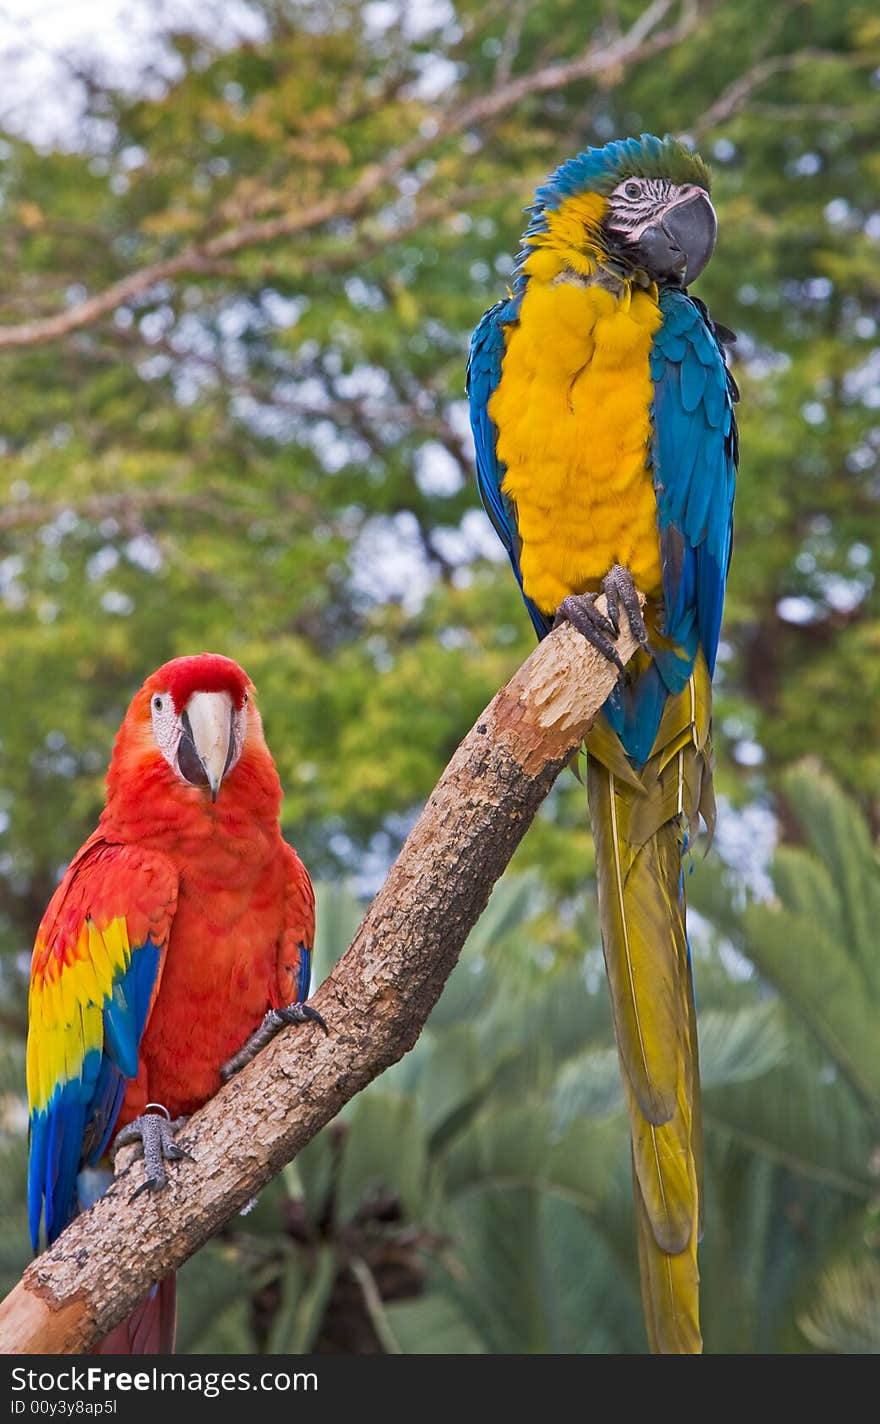 A red macaw and a blue macaw both on the same perch. A red macaw and a blue macaw both on the same perch